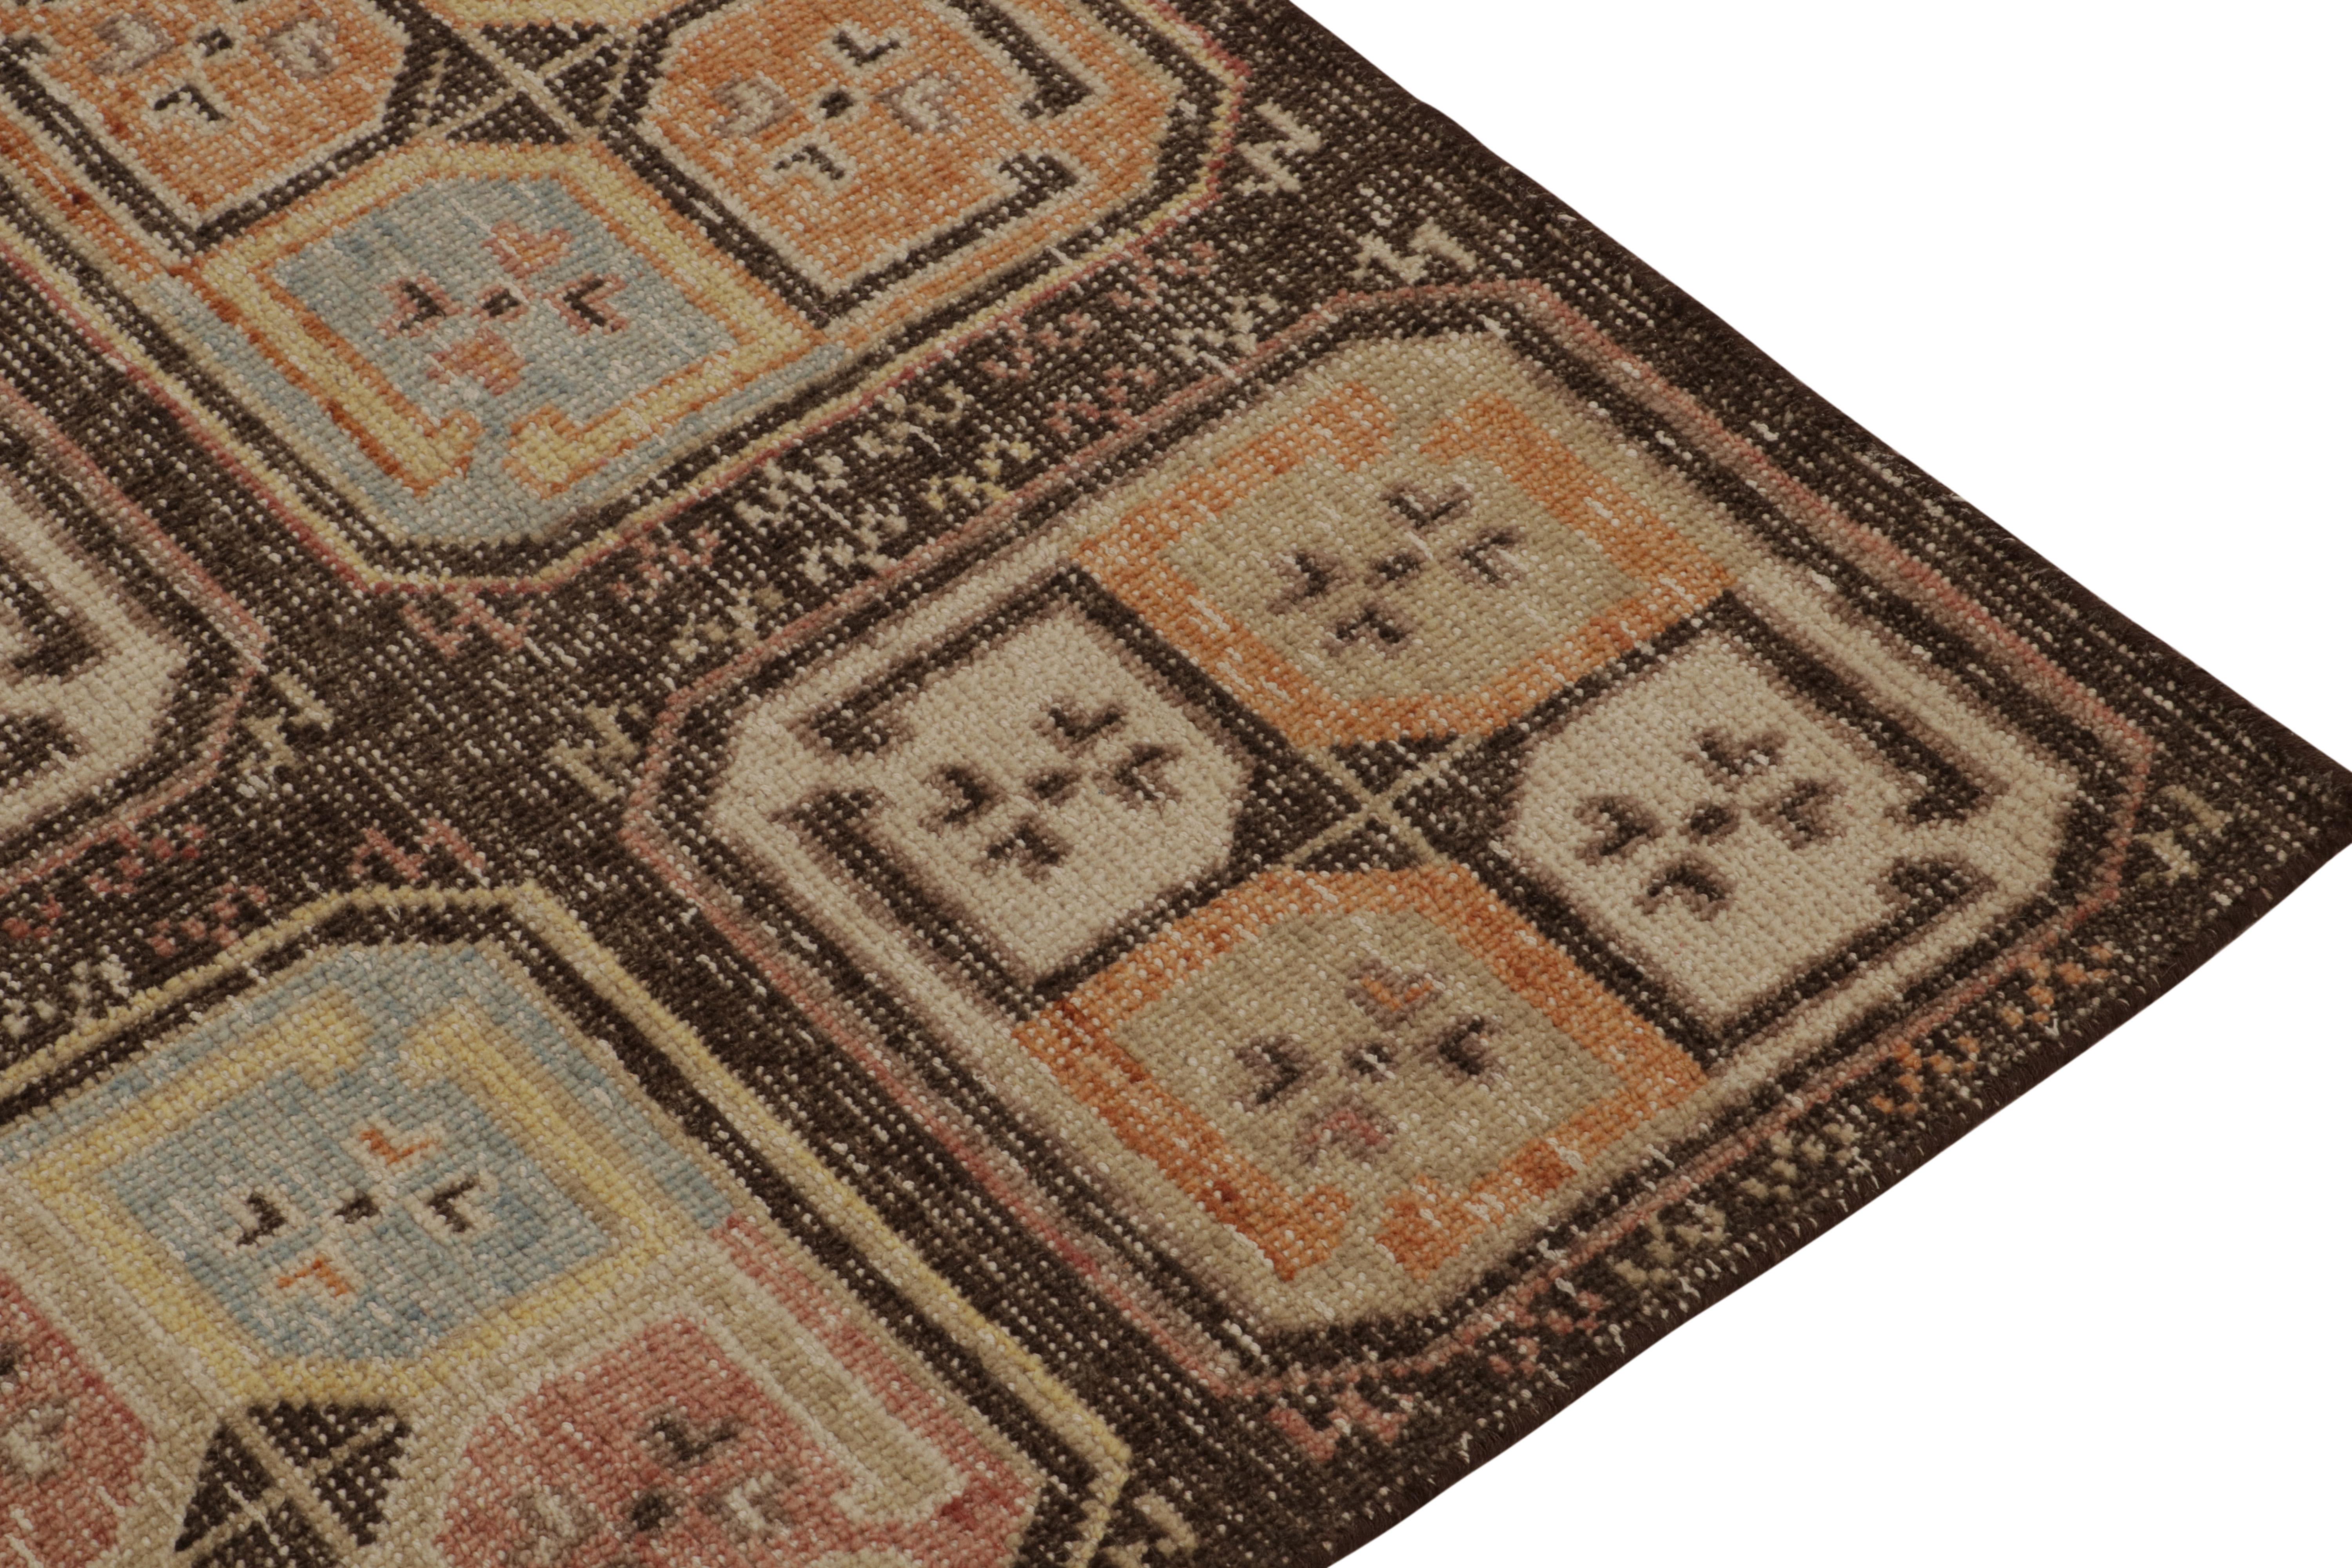 Rug & Kilim’s Distressed Tribal Style Rug in Beige-Brown & Polychrome Medallions In New Condition For Sale In Long Island City, NY